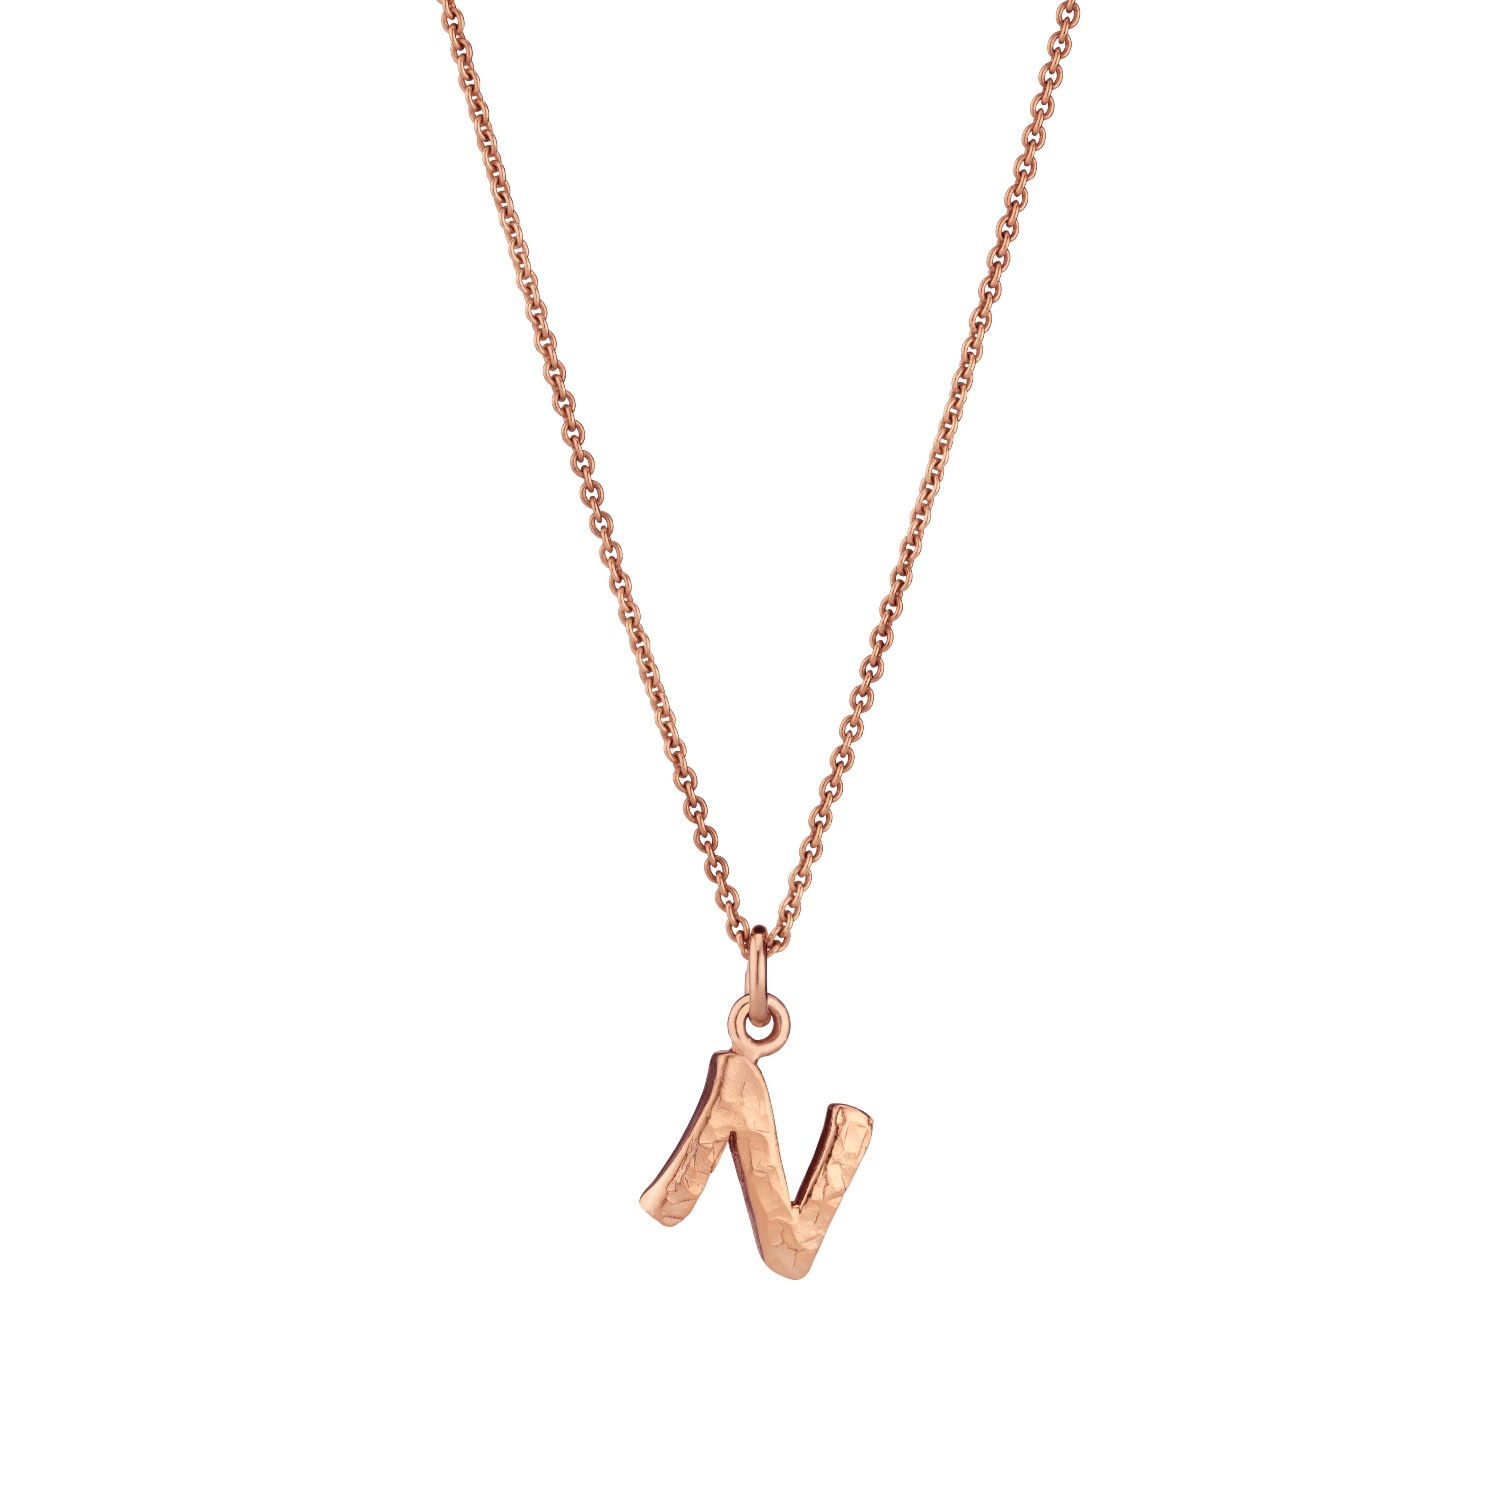 Women’s Rose Gold Plated Textured Initial Letter Necklace Posh Totty Designs